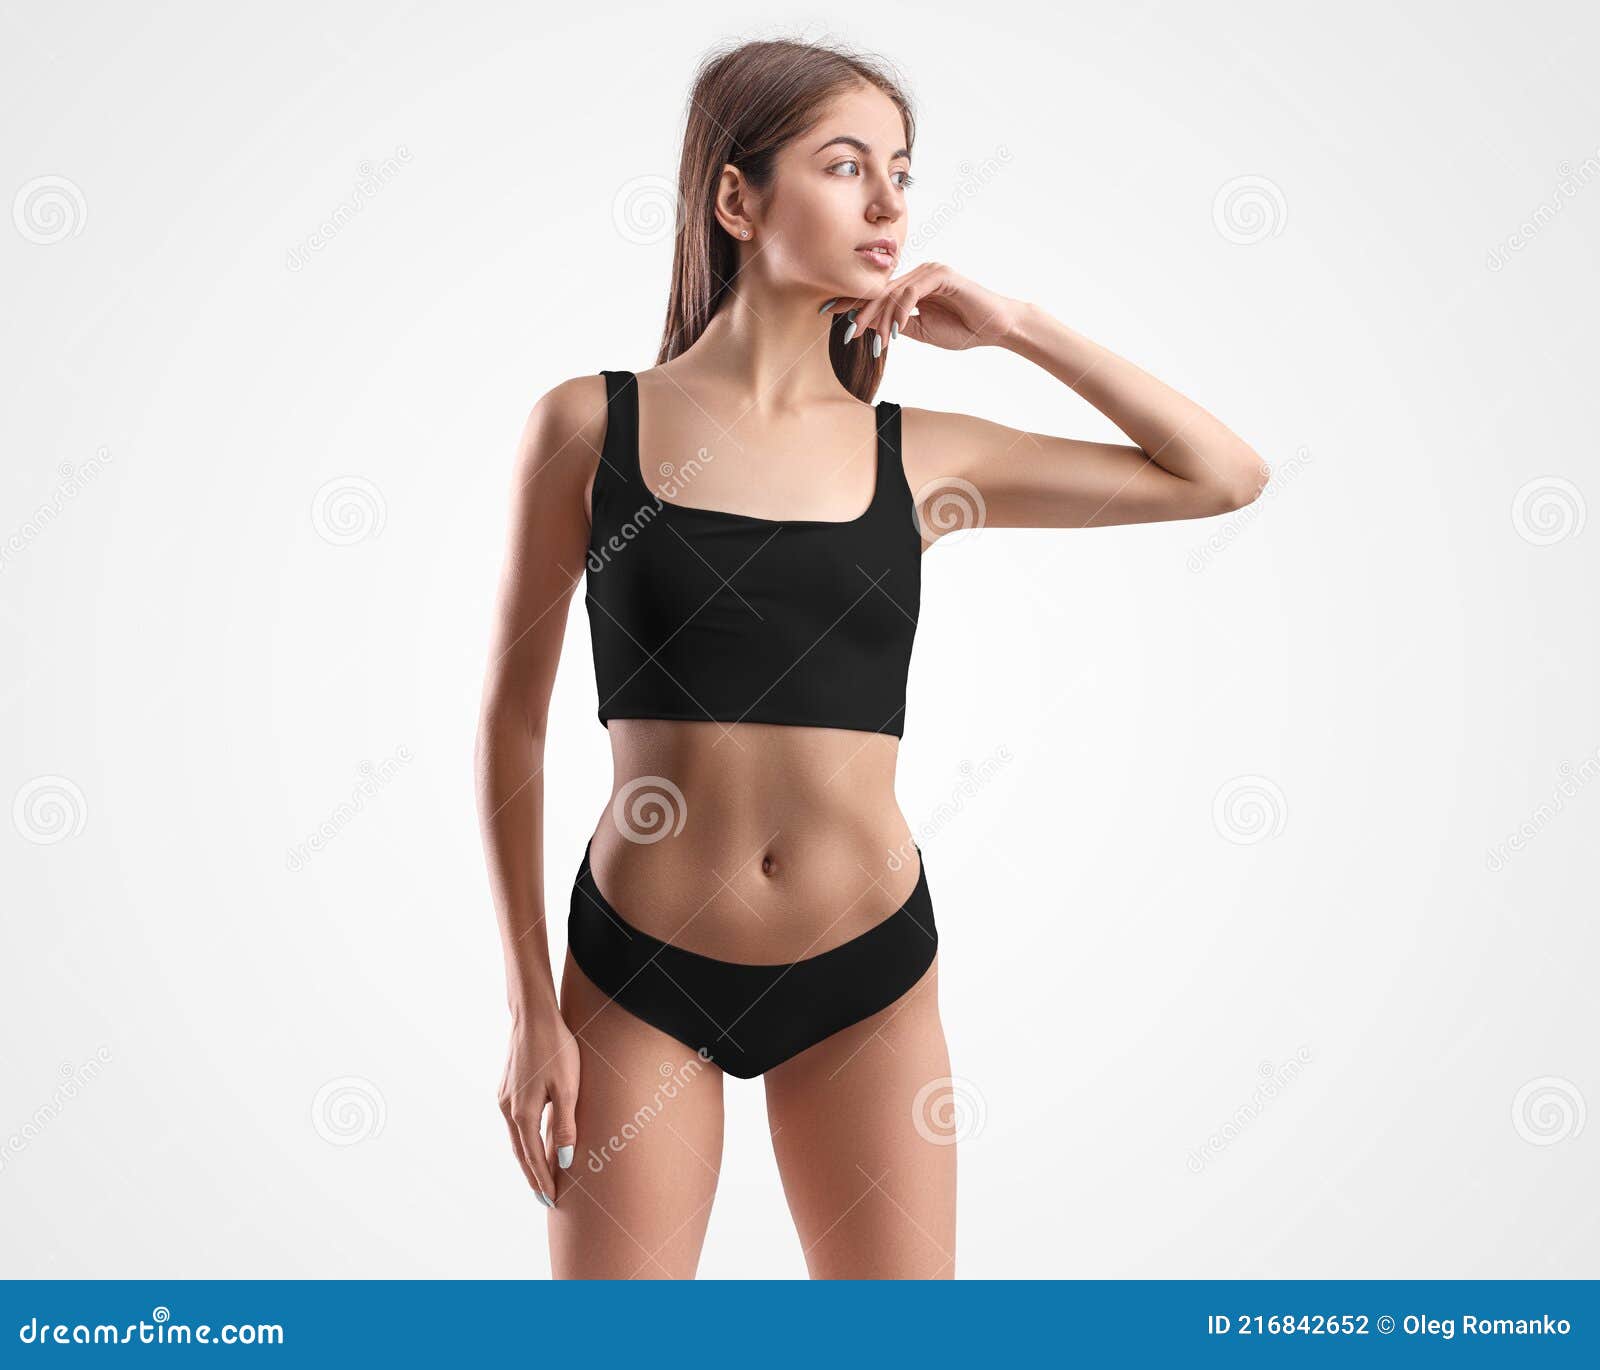 https://thumbs.dreamstime.com/z/black-underwear-mockup-cute-girl-sports-panties-top-background-front-view-template-sexy-women-s-clothing-close-up-216842652.jpg